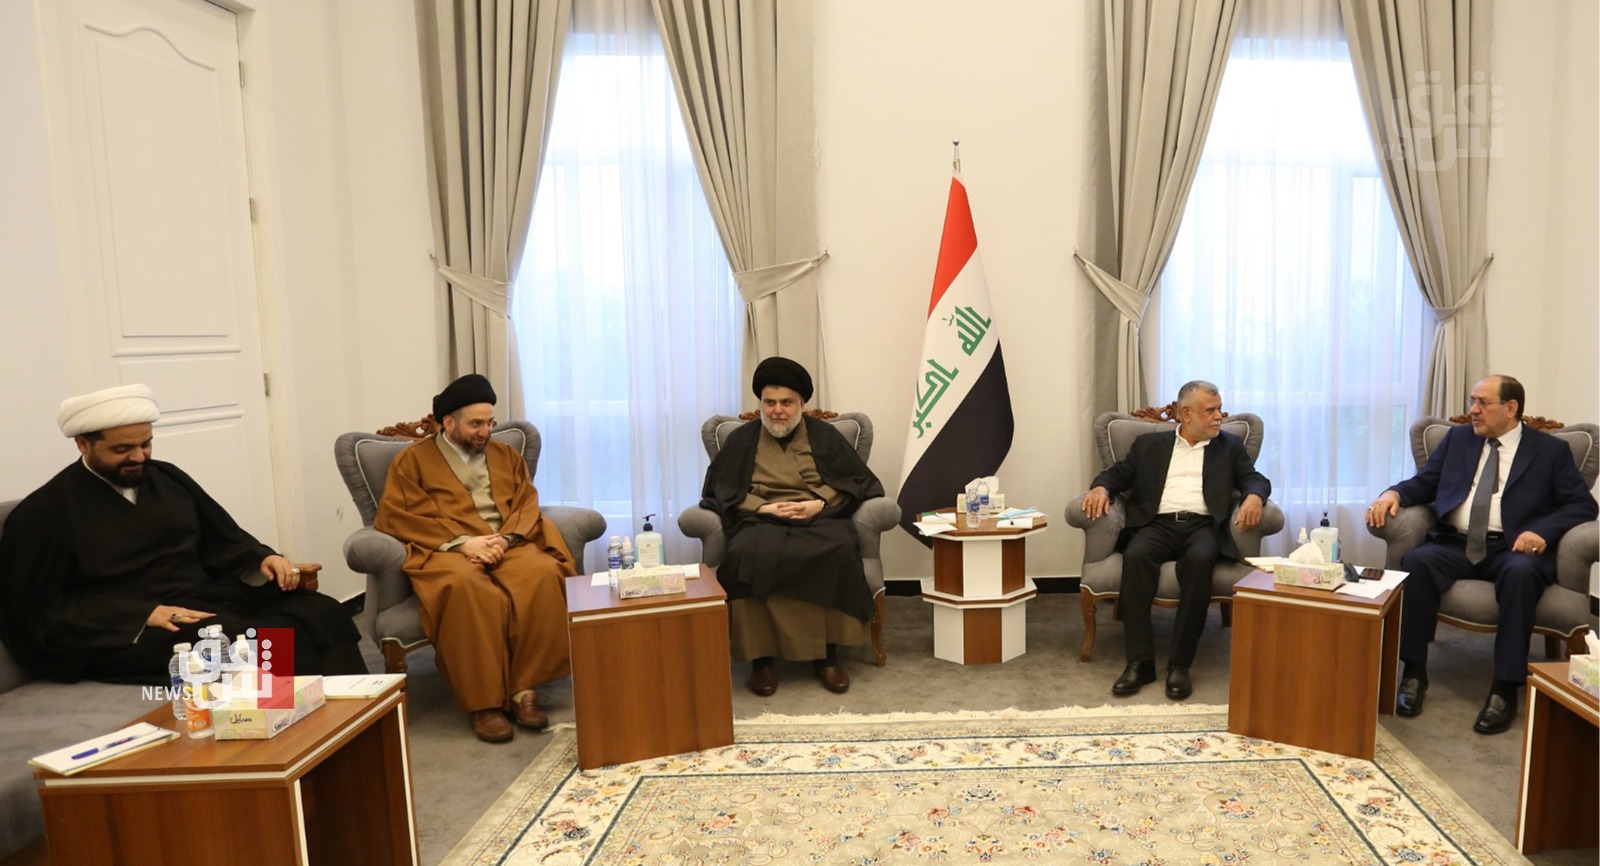 Within 48 hours.. Al-Titare and Al-Sadr meet in the presence of Al-Maliki at the last chance meeting